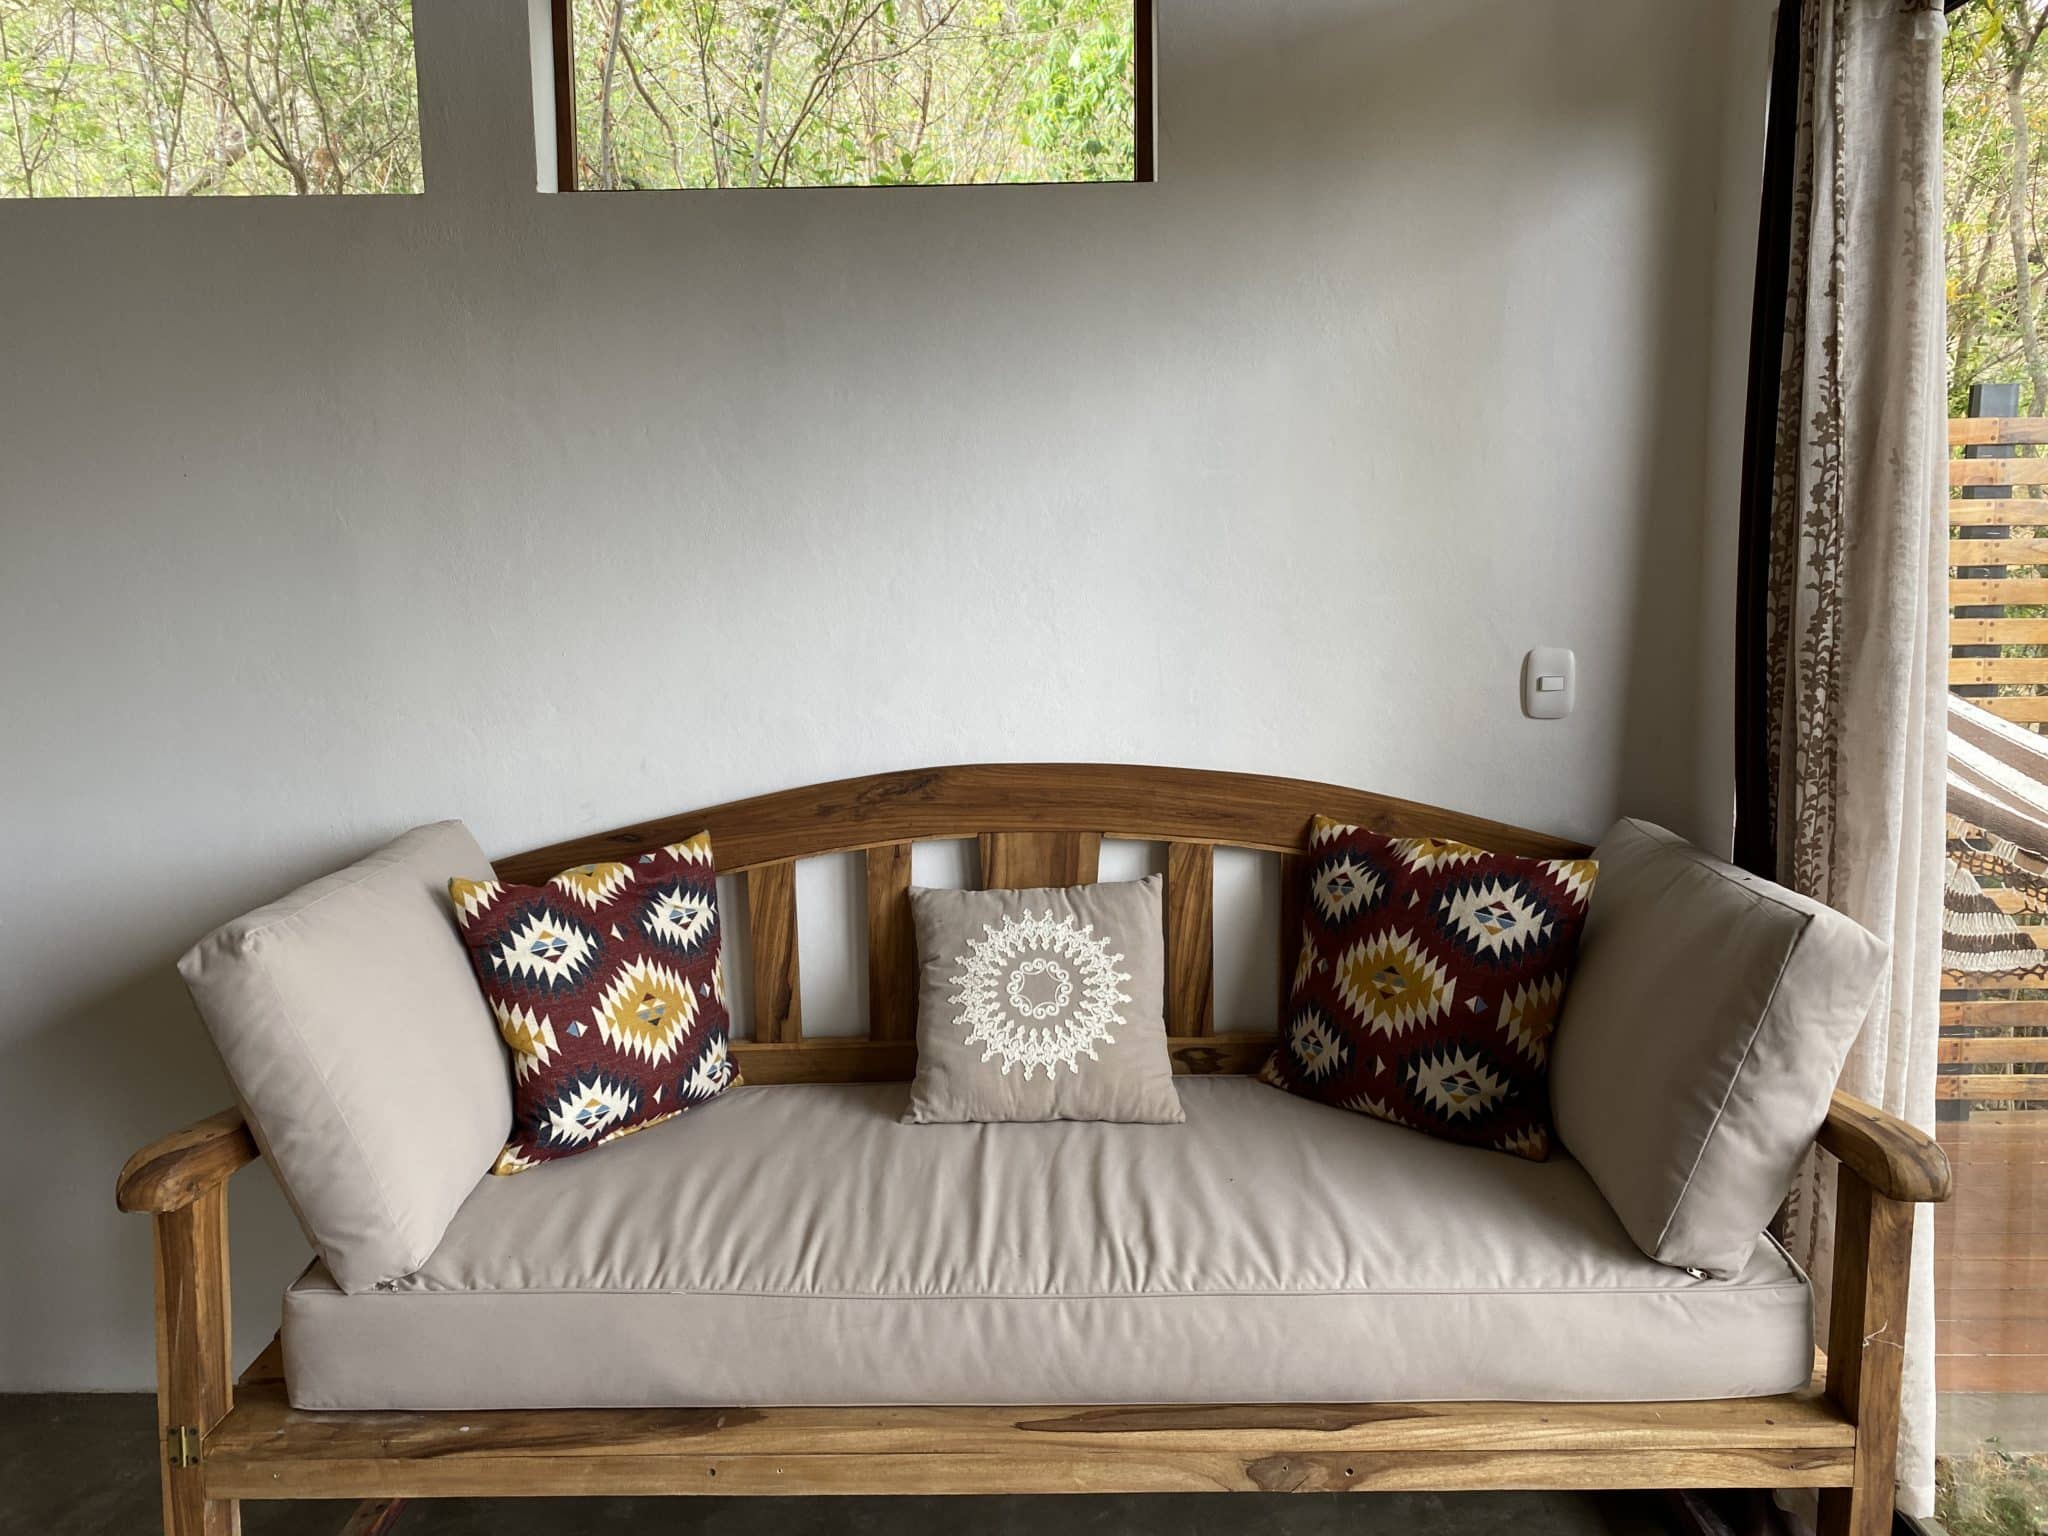 A wooden sette decorated with brown pillows